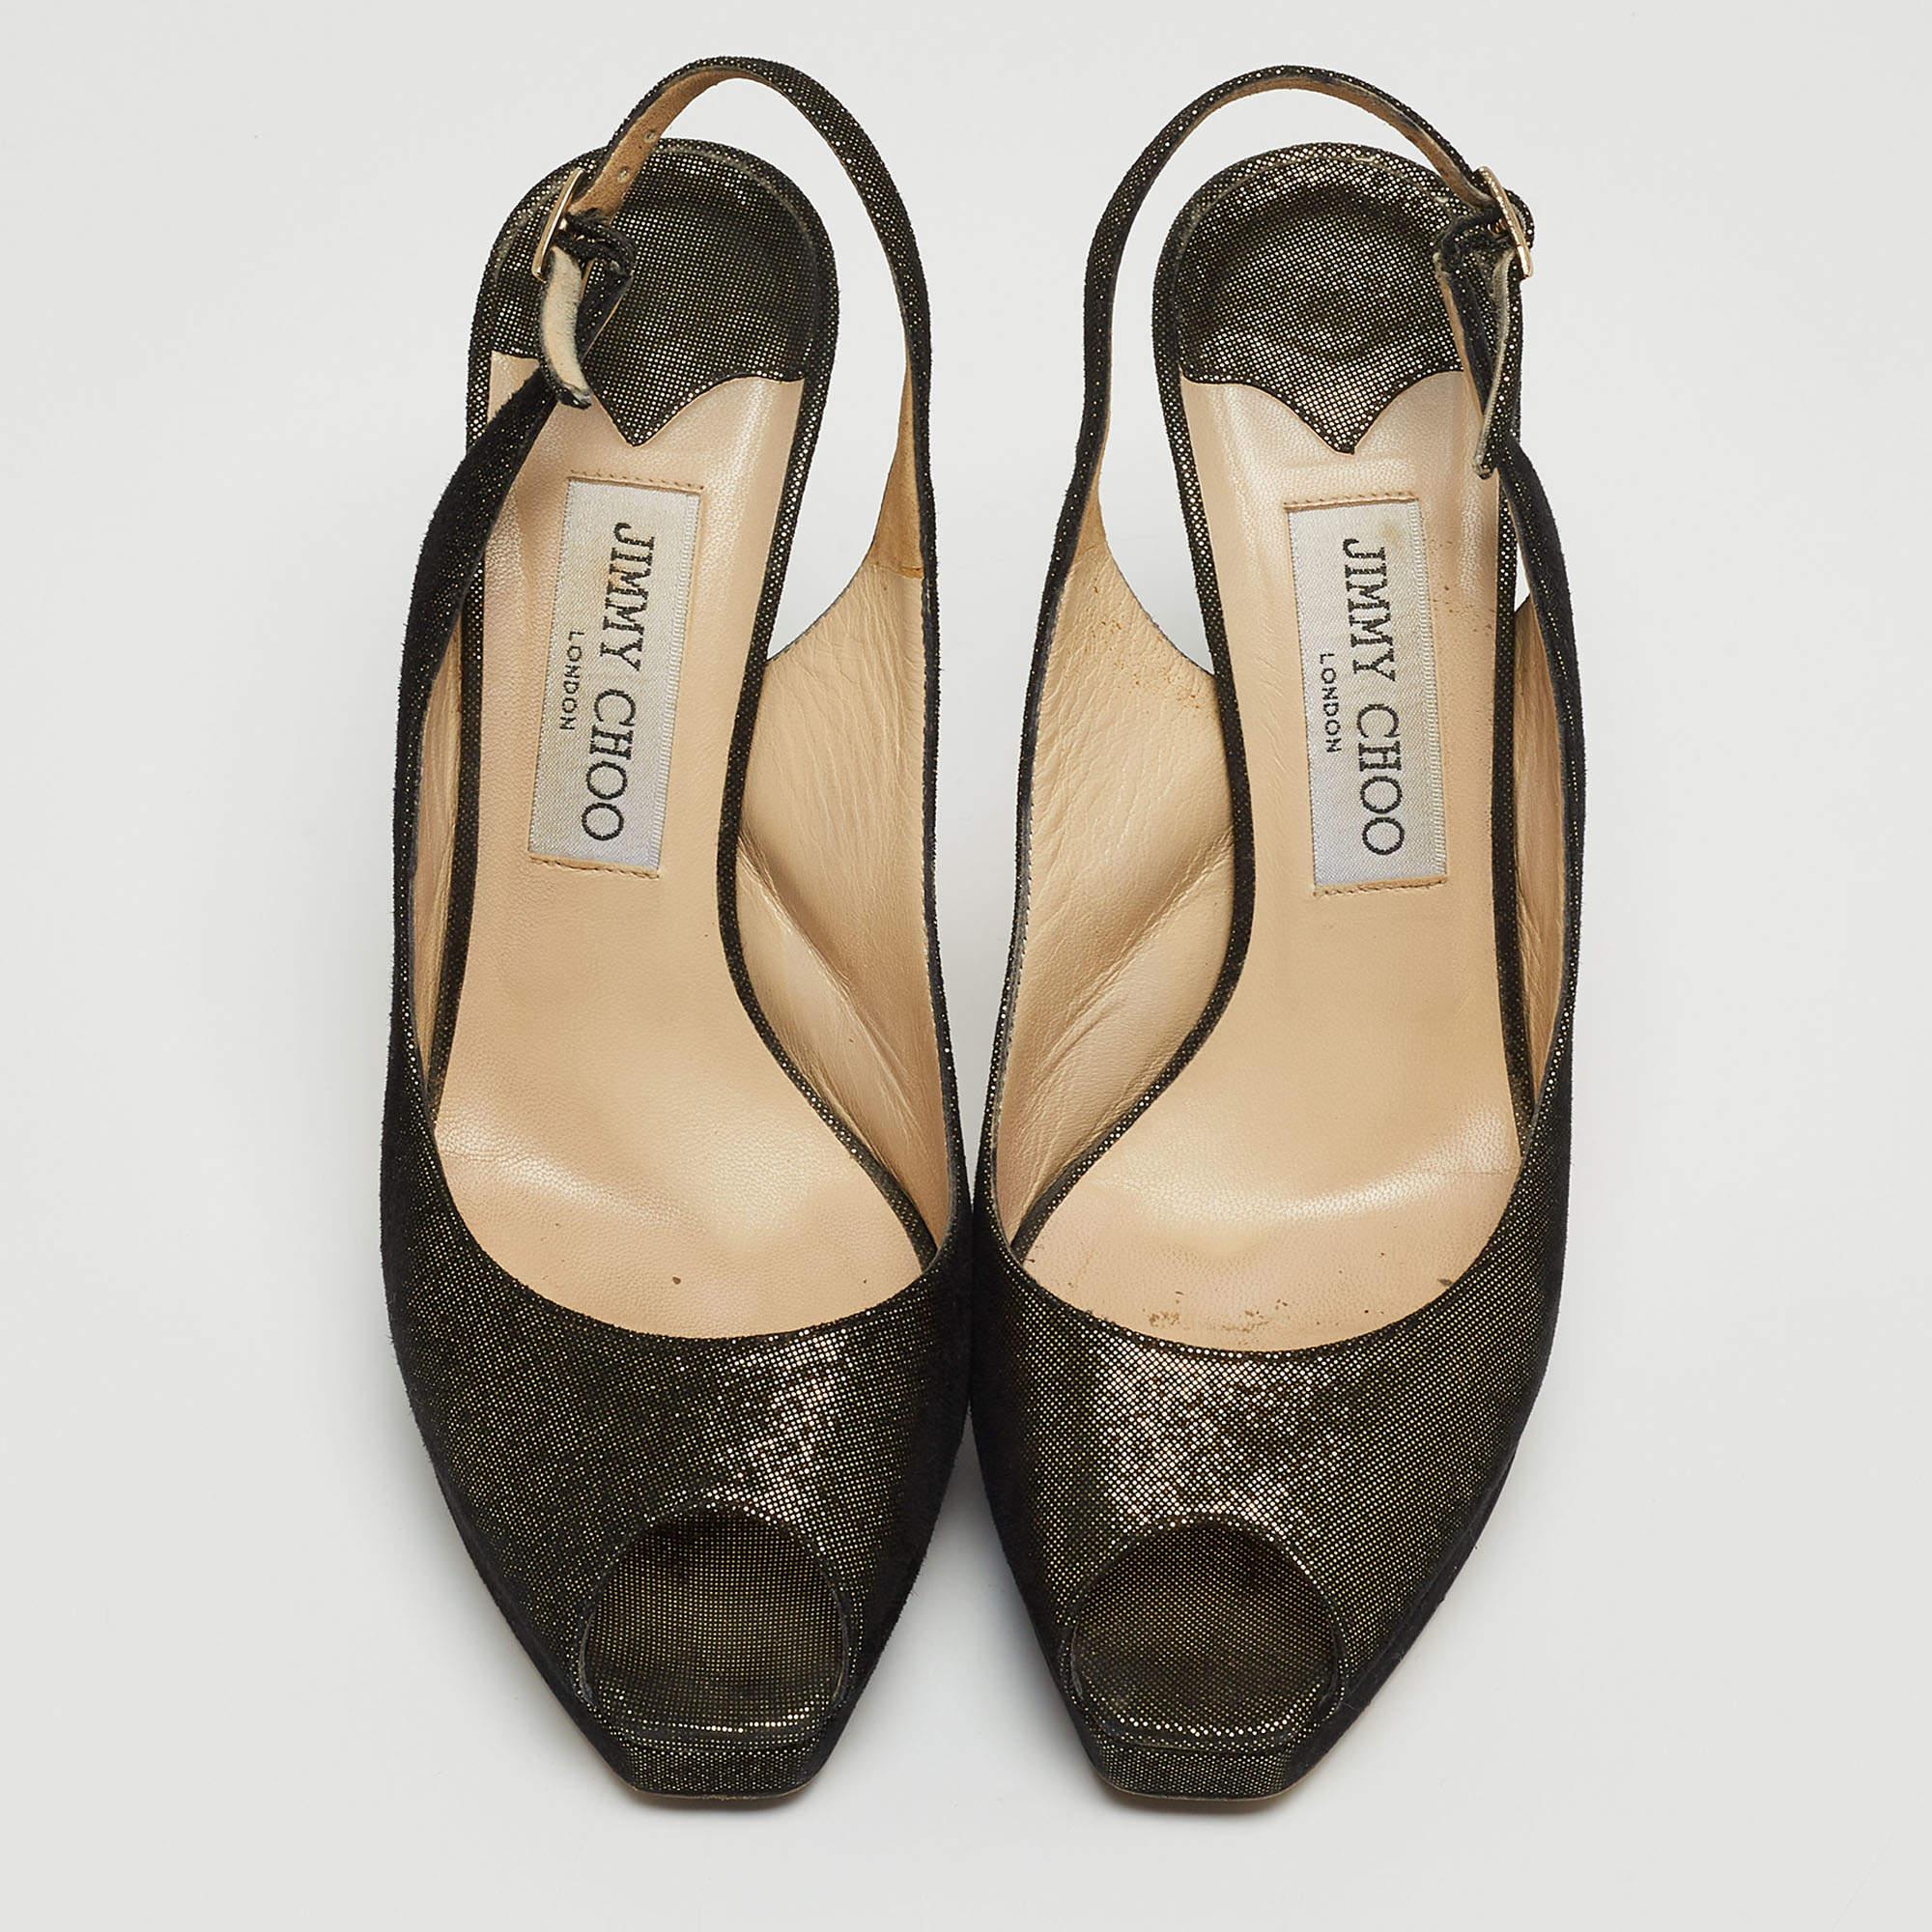 Jimmy Choo Metallic Laminated Suede Clue Slingback Pumps Size 38 In Good Condition For Sale In Dubai, Al Qouz 2